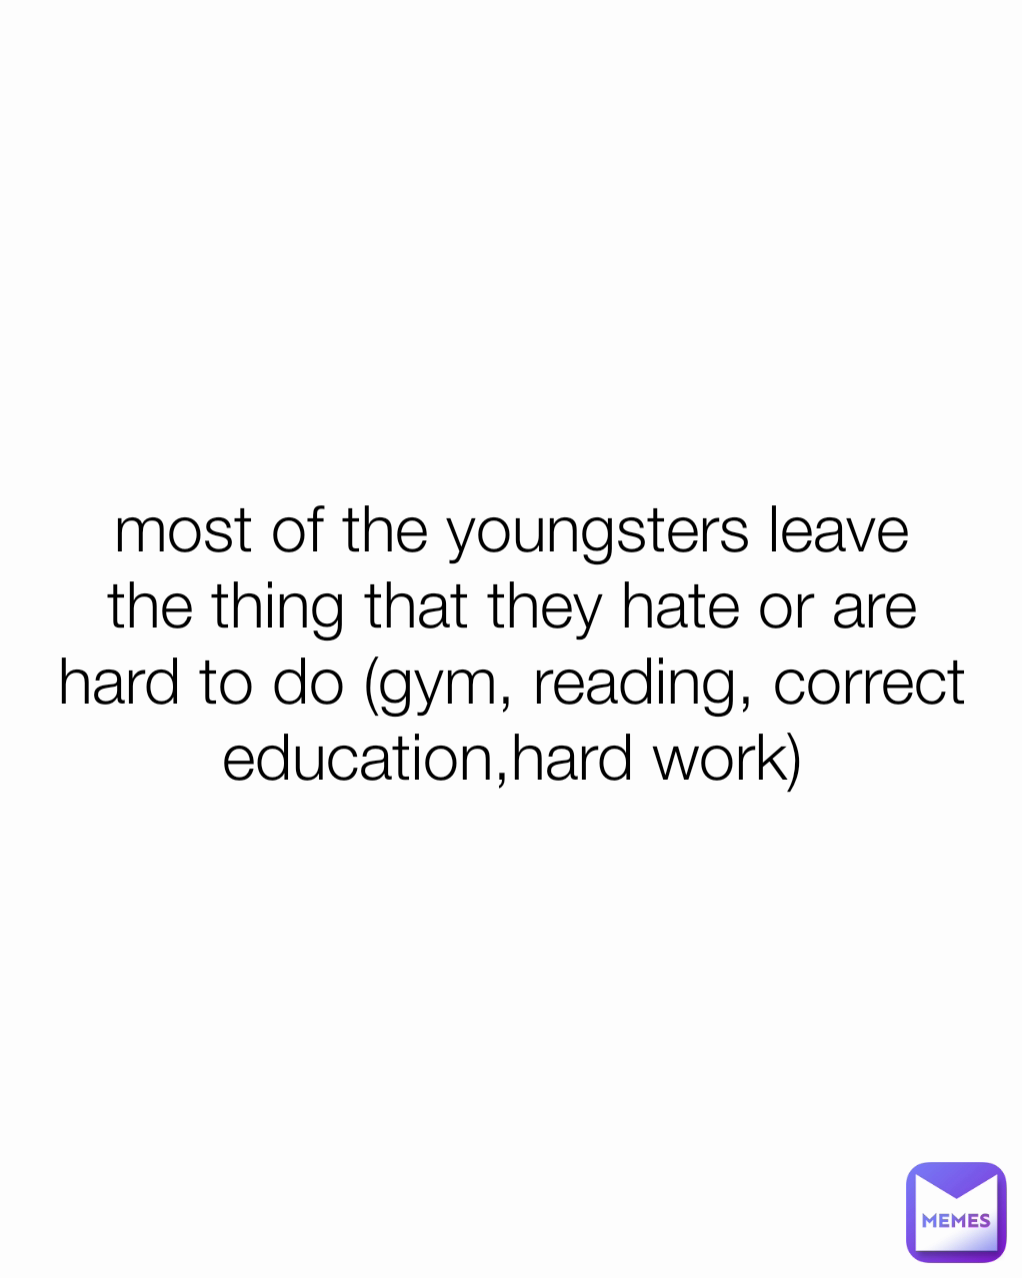 most of the youngsters leave the thing that they hate or are hard to do (gym, reading, correct education,hard work)